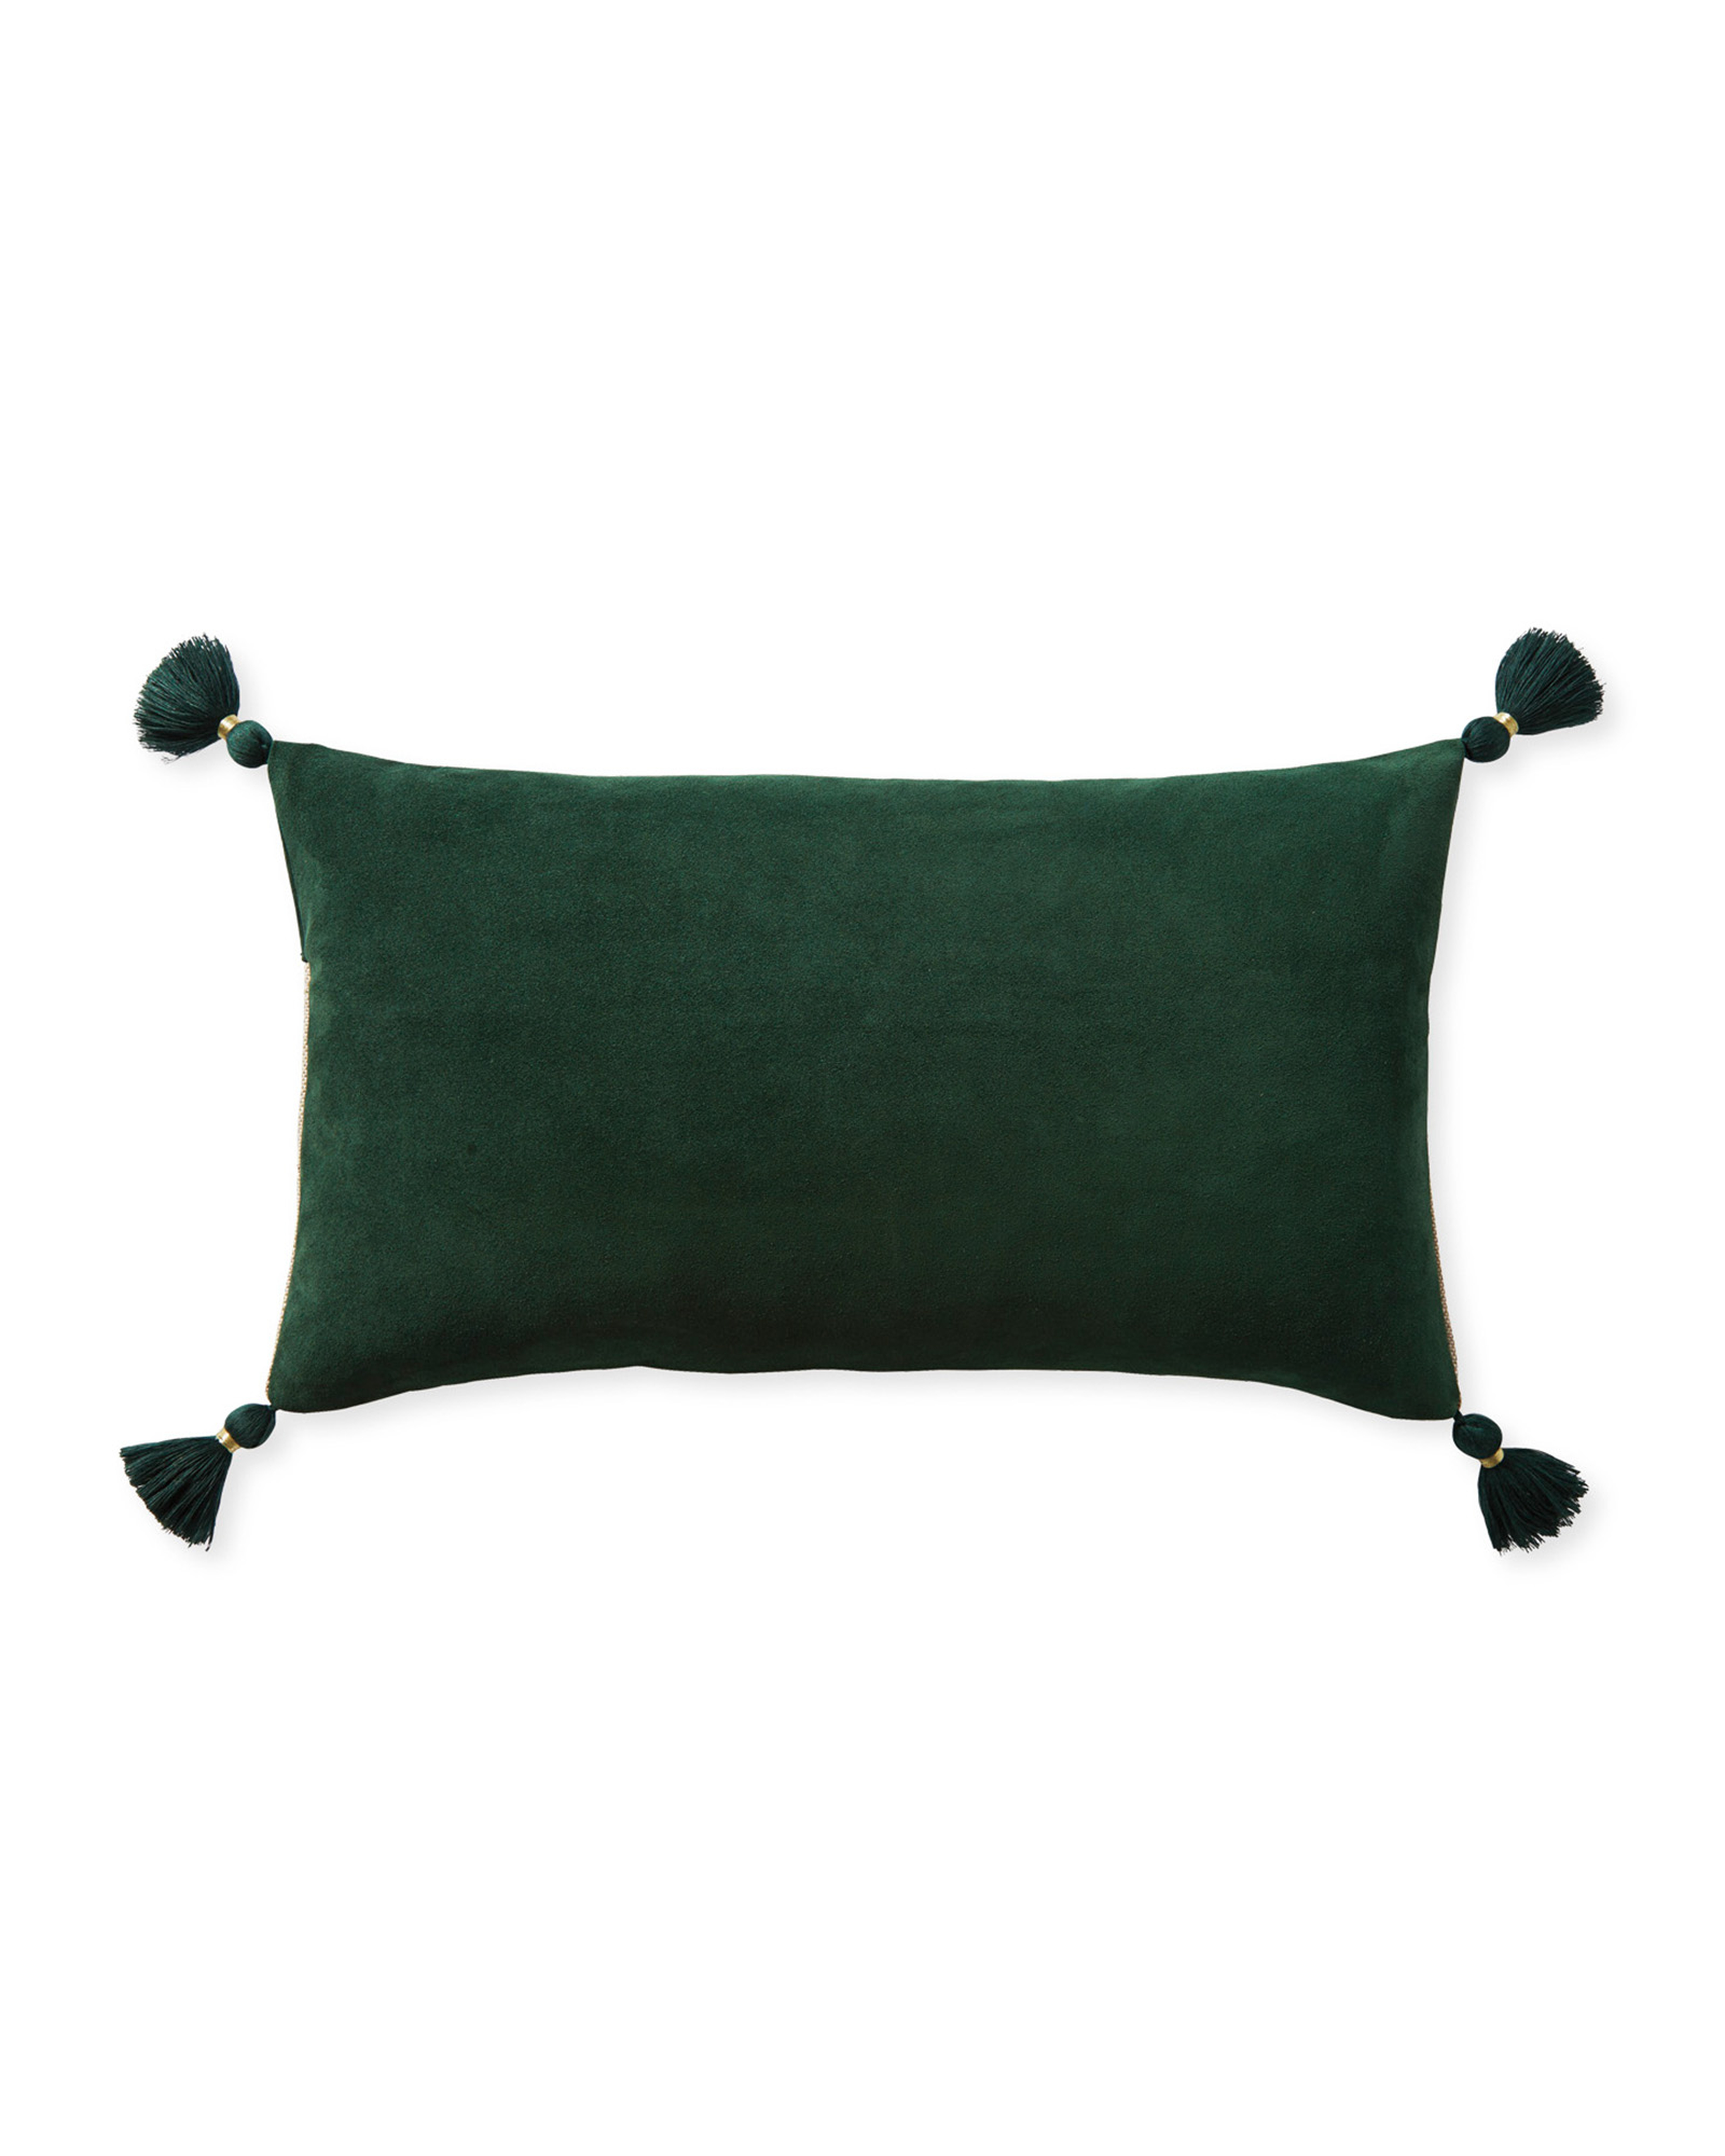 Suede Eva 12" x 21" Pillow Cover - Evergreen - Insert sold separately - Serena and Lily